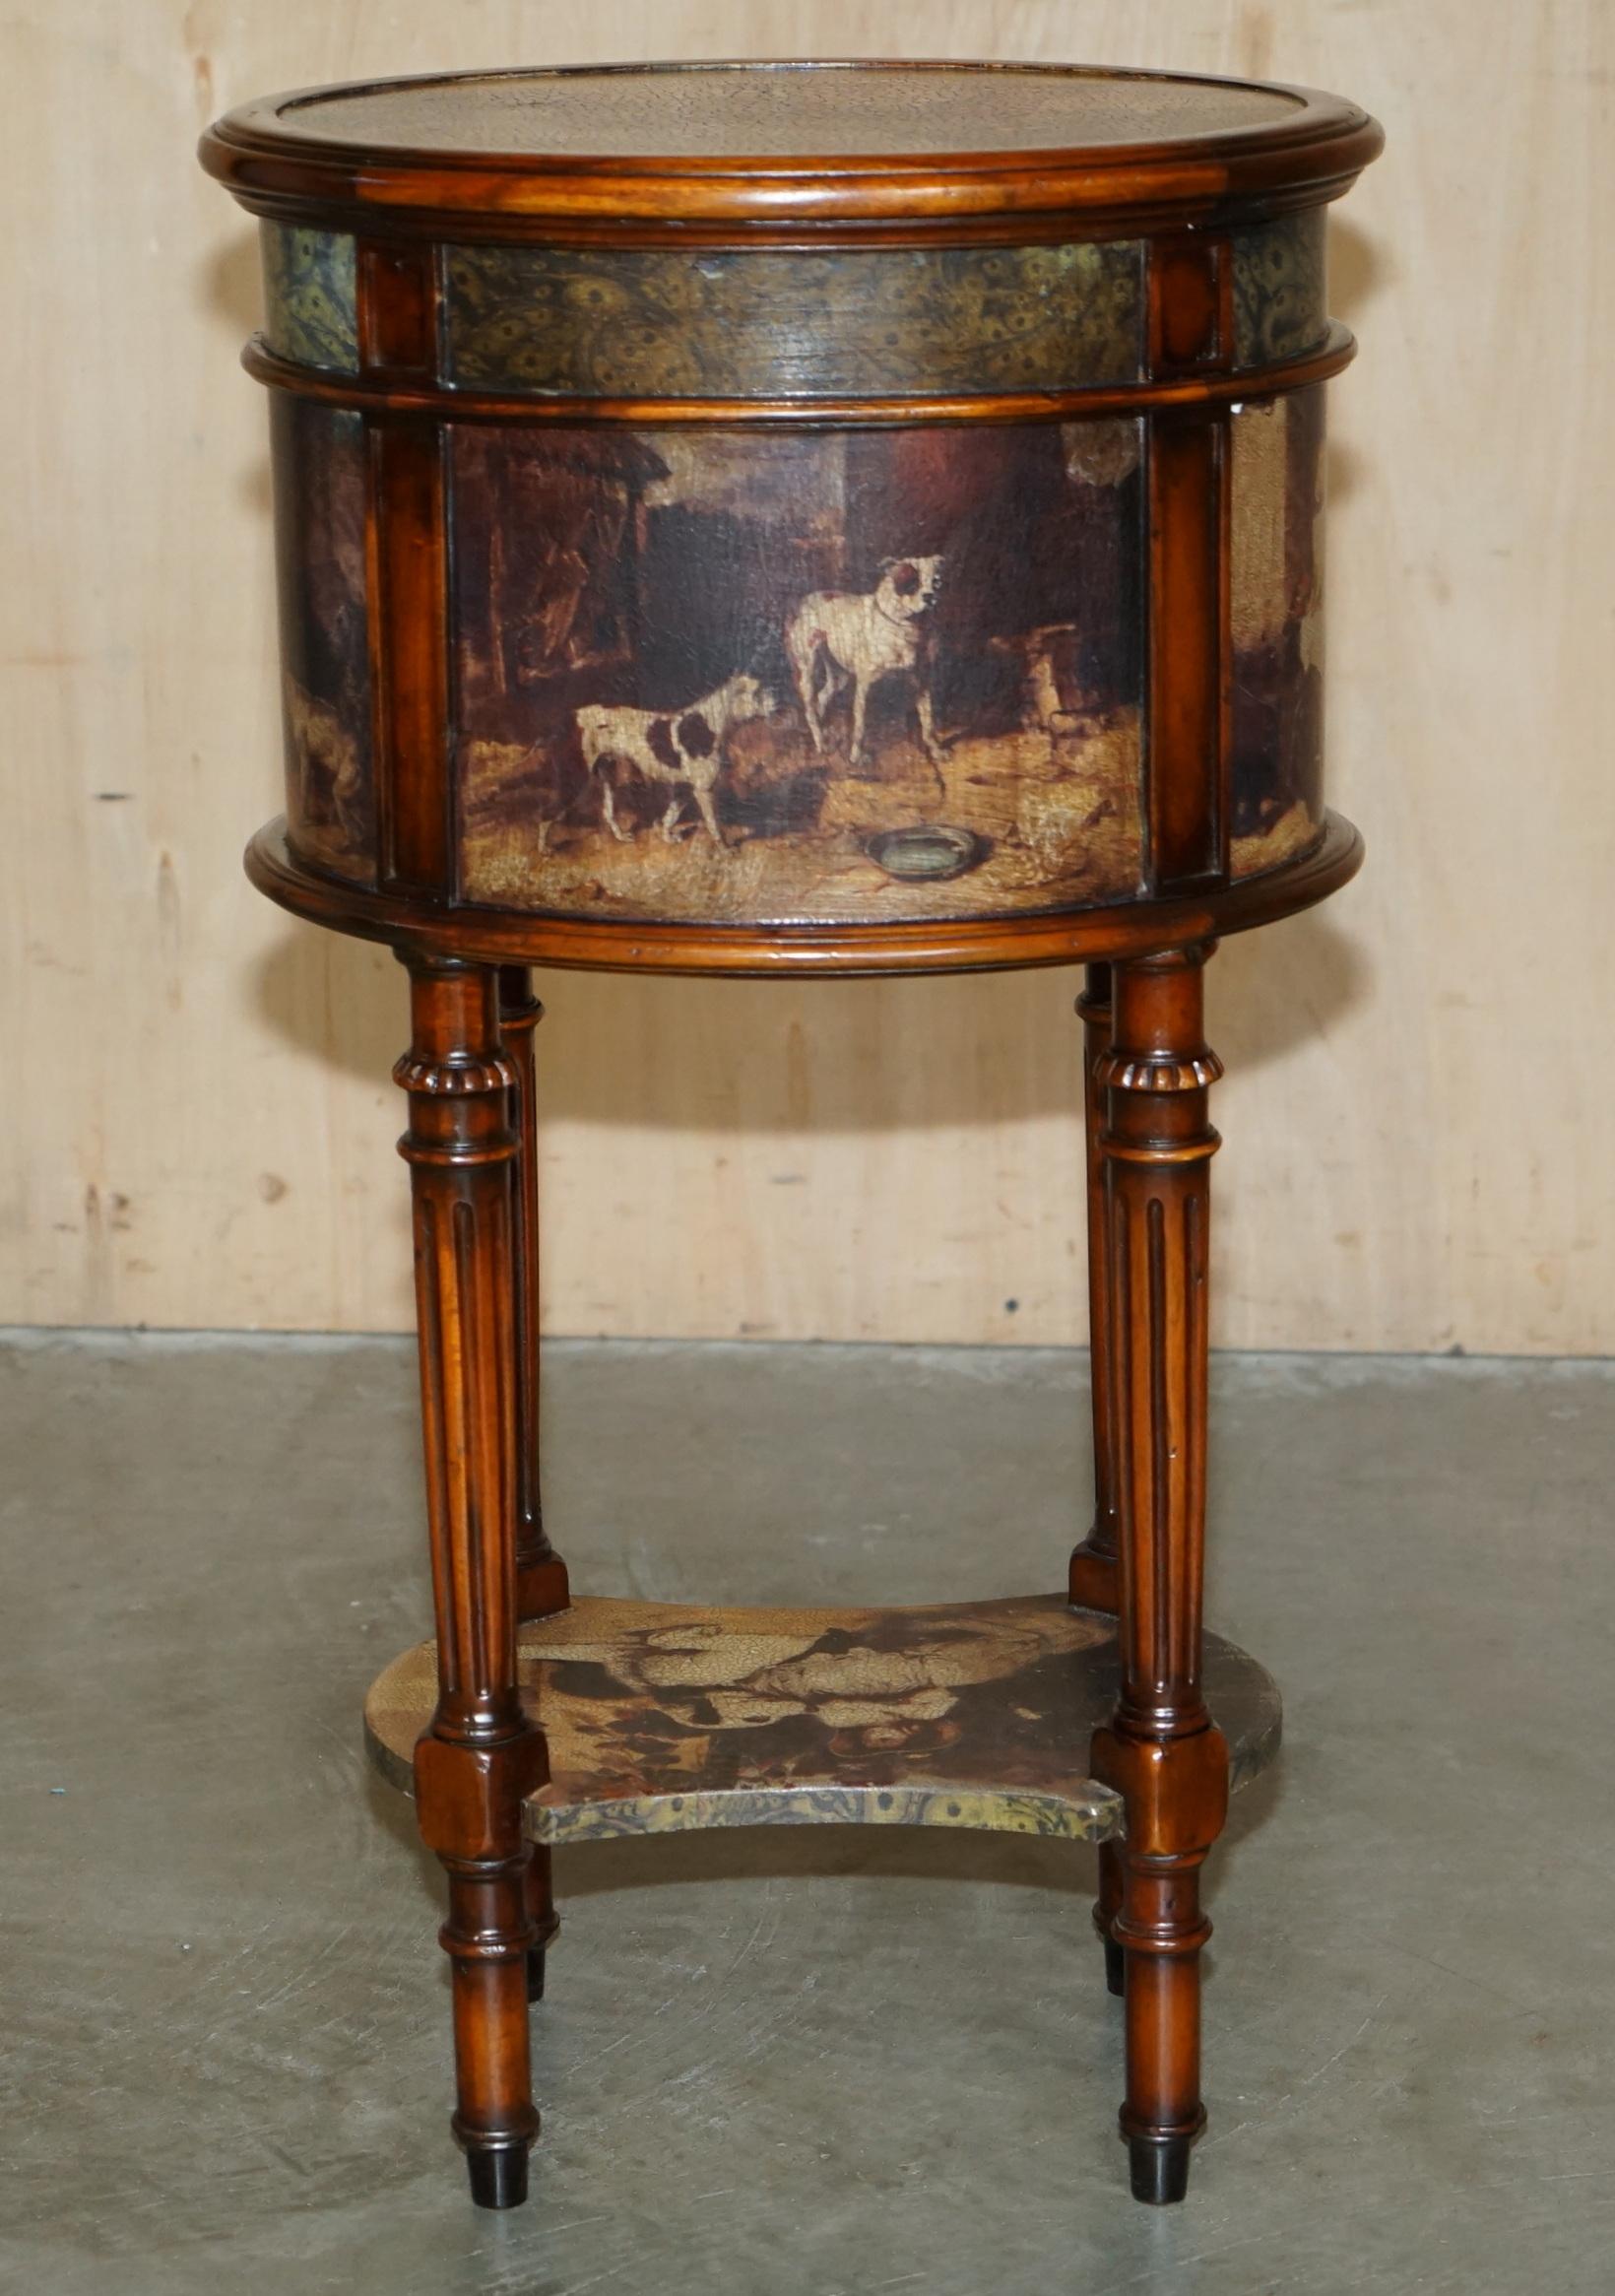 EXQUISITE TWO TIER TALL SiDE TABLE CABINET LEATHER CLADDED & PAINTED WITH DOGS For Sale 4